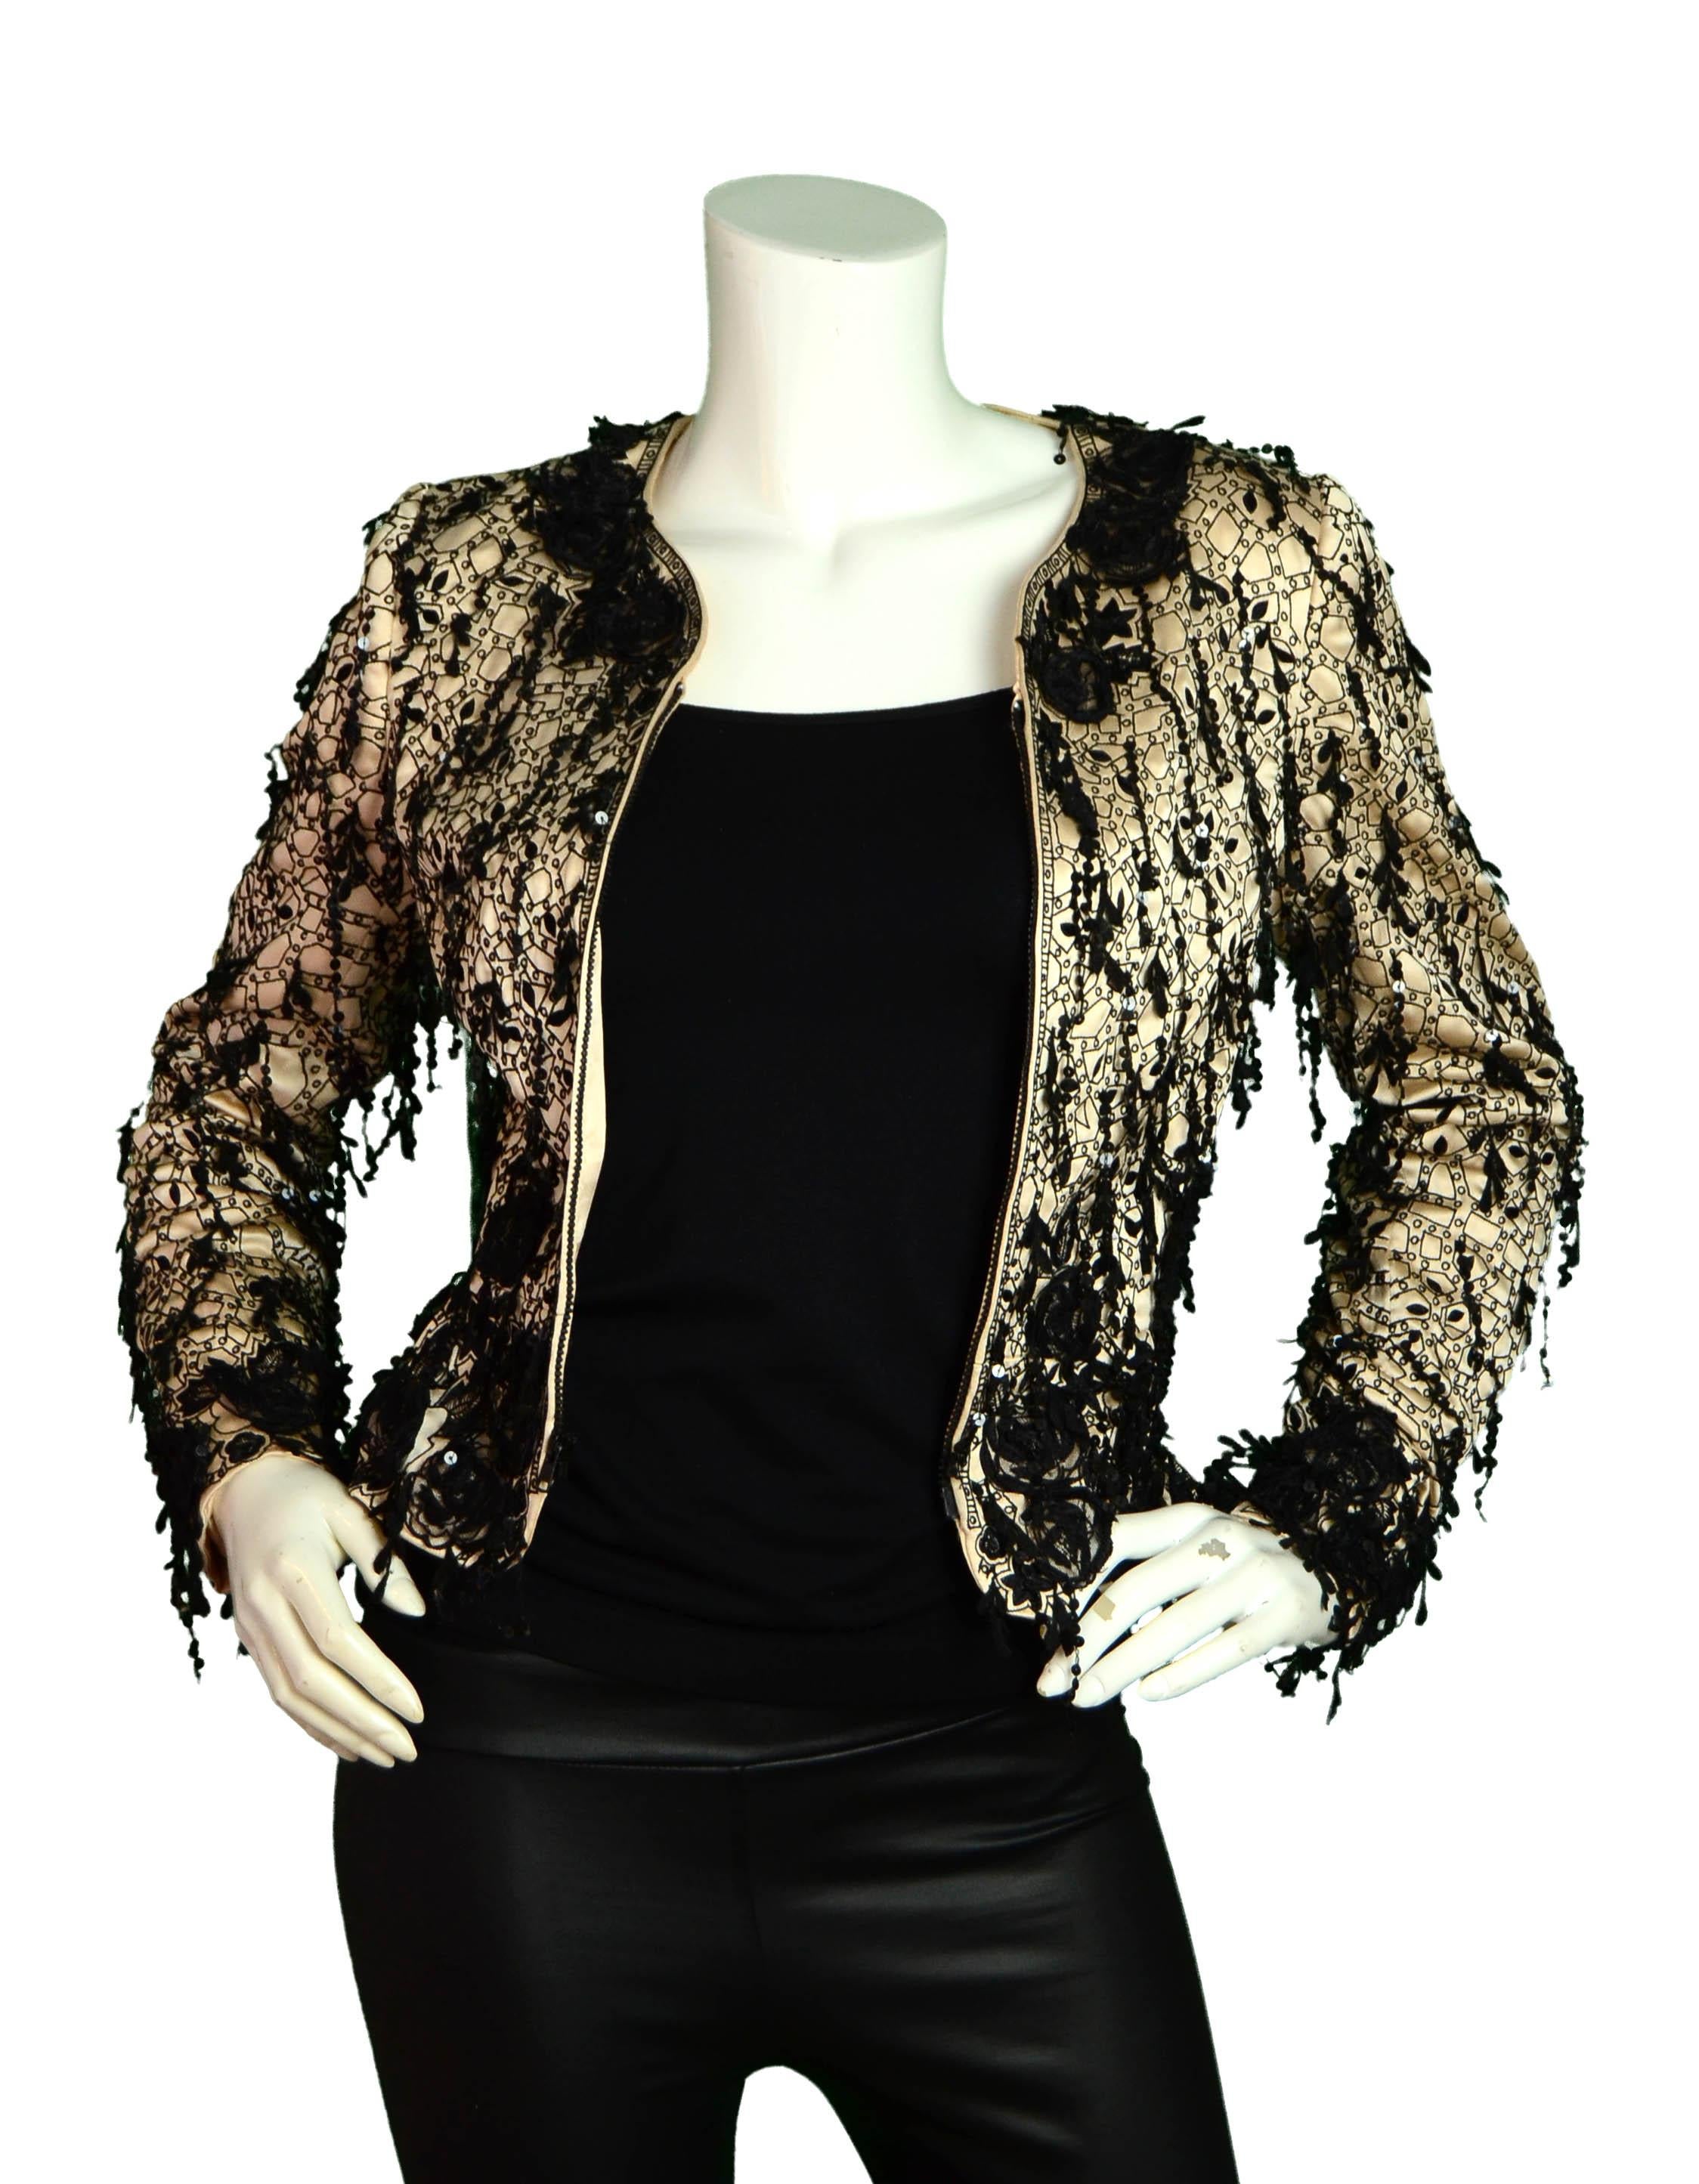 Oscar de la Renta Champagne Silk Embroidered Jacket w/Sequins

Made In: USA
Color: Champagne w/black embroidery
Materials: Silk
Lining: Silk
Opening/Closure: Zipper
Overall Condition: Excellent

Tag Size: Missing *Please refer to measurements to